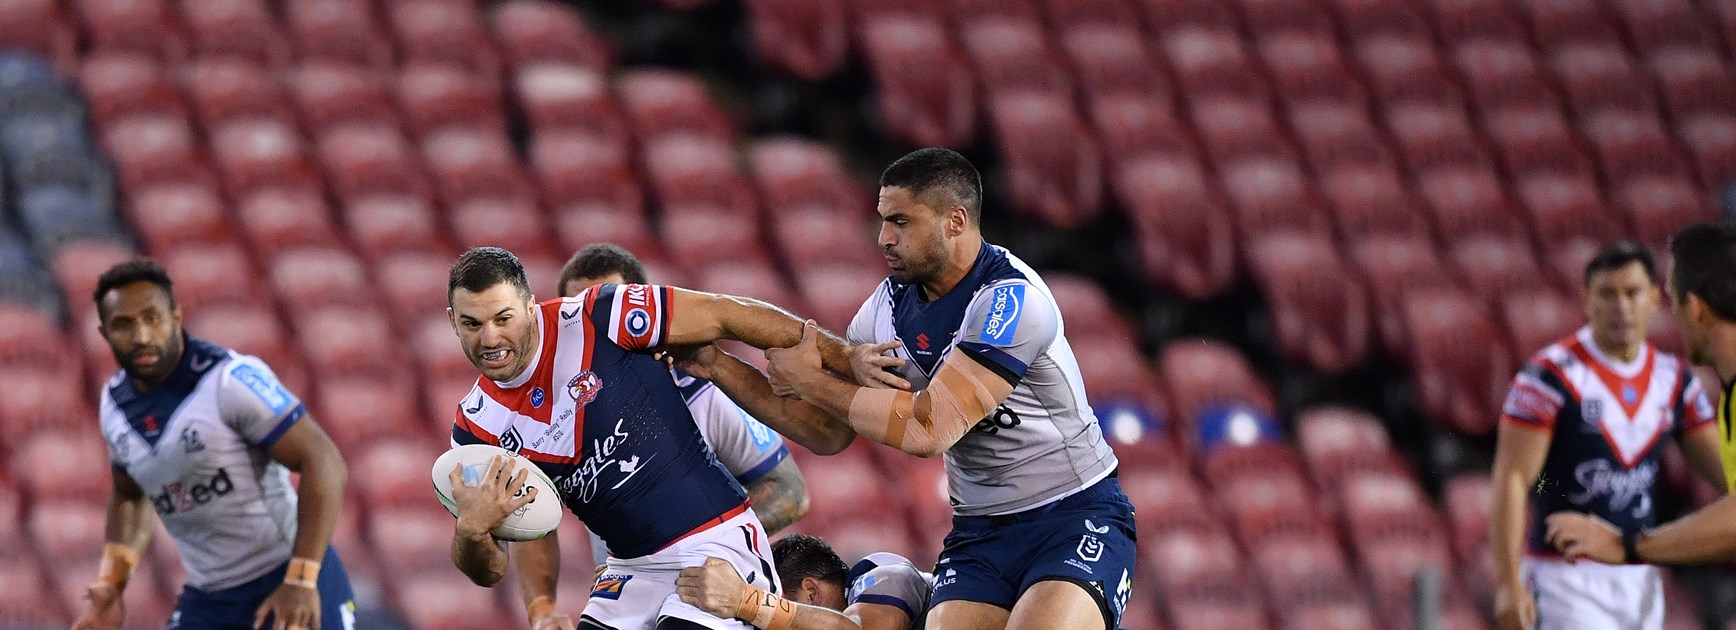 Roosters Defeated by Storm in Wet Conditions